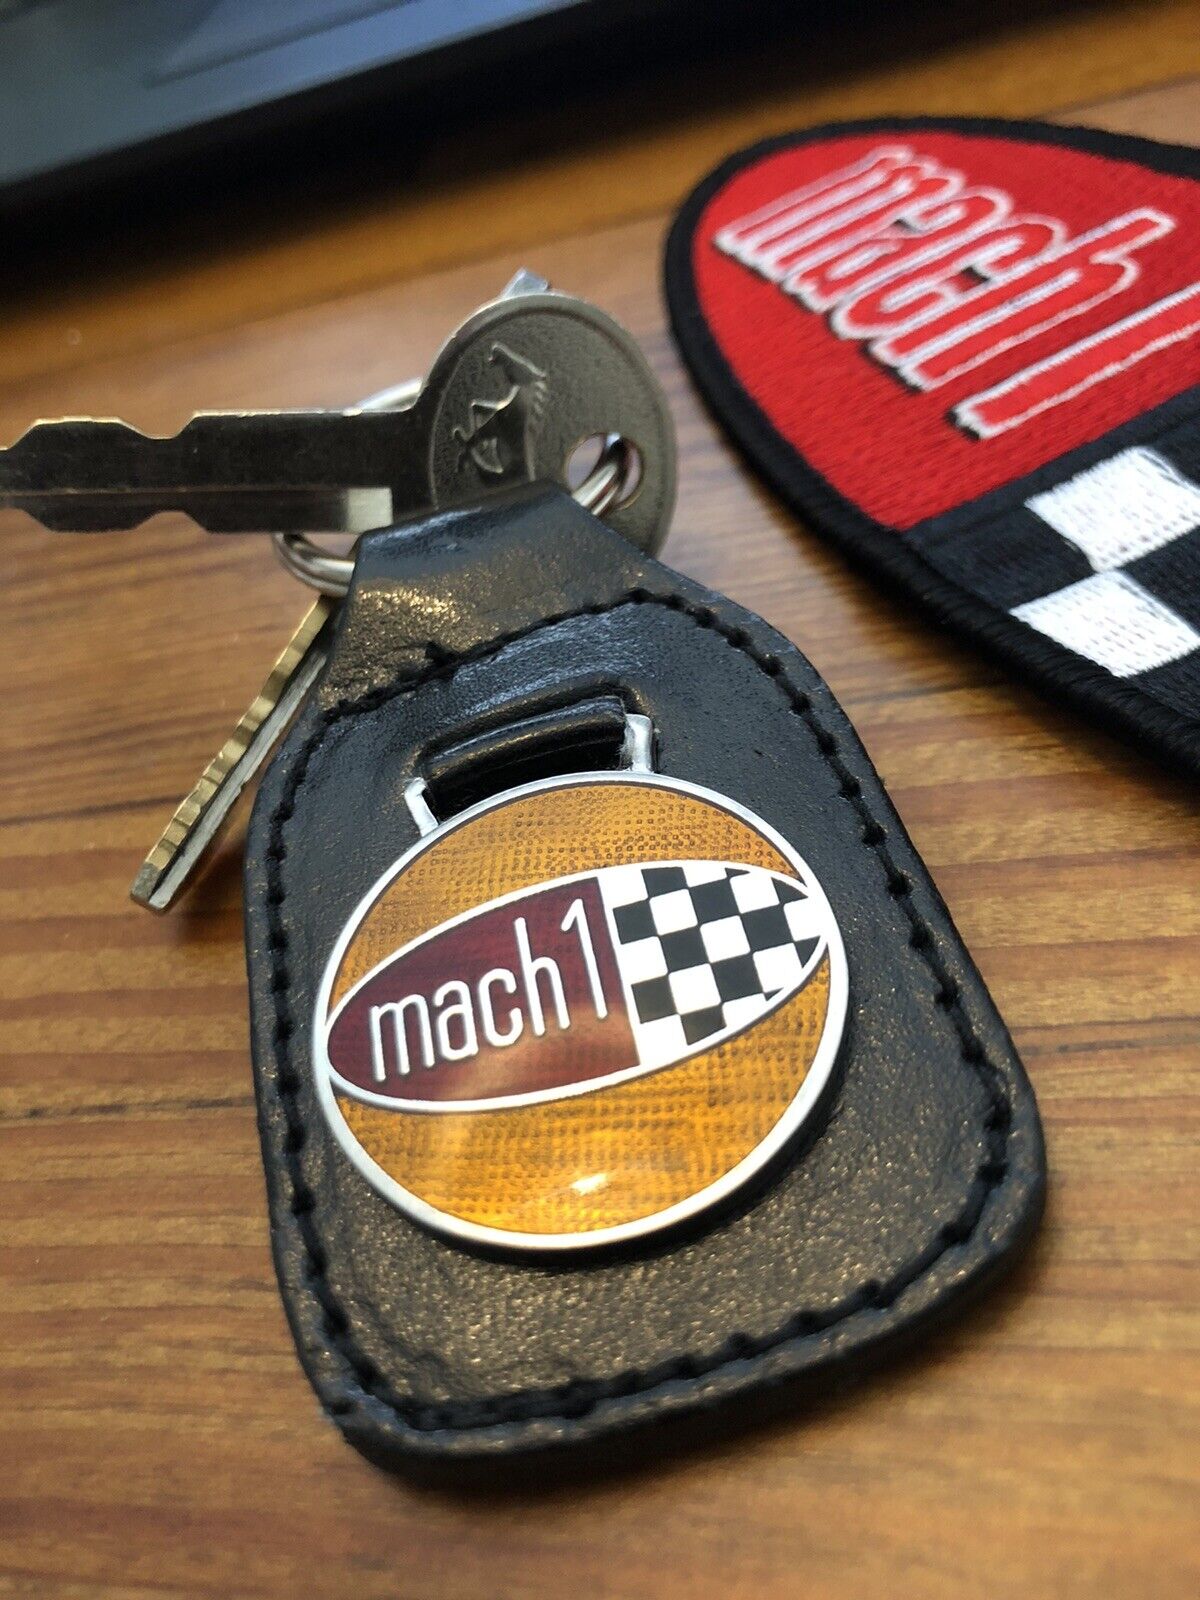 1969 1970 Mach 1 Ford Mustang Keychain Fob and Patch Vintage NOS